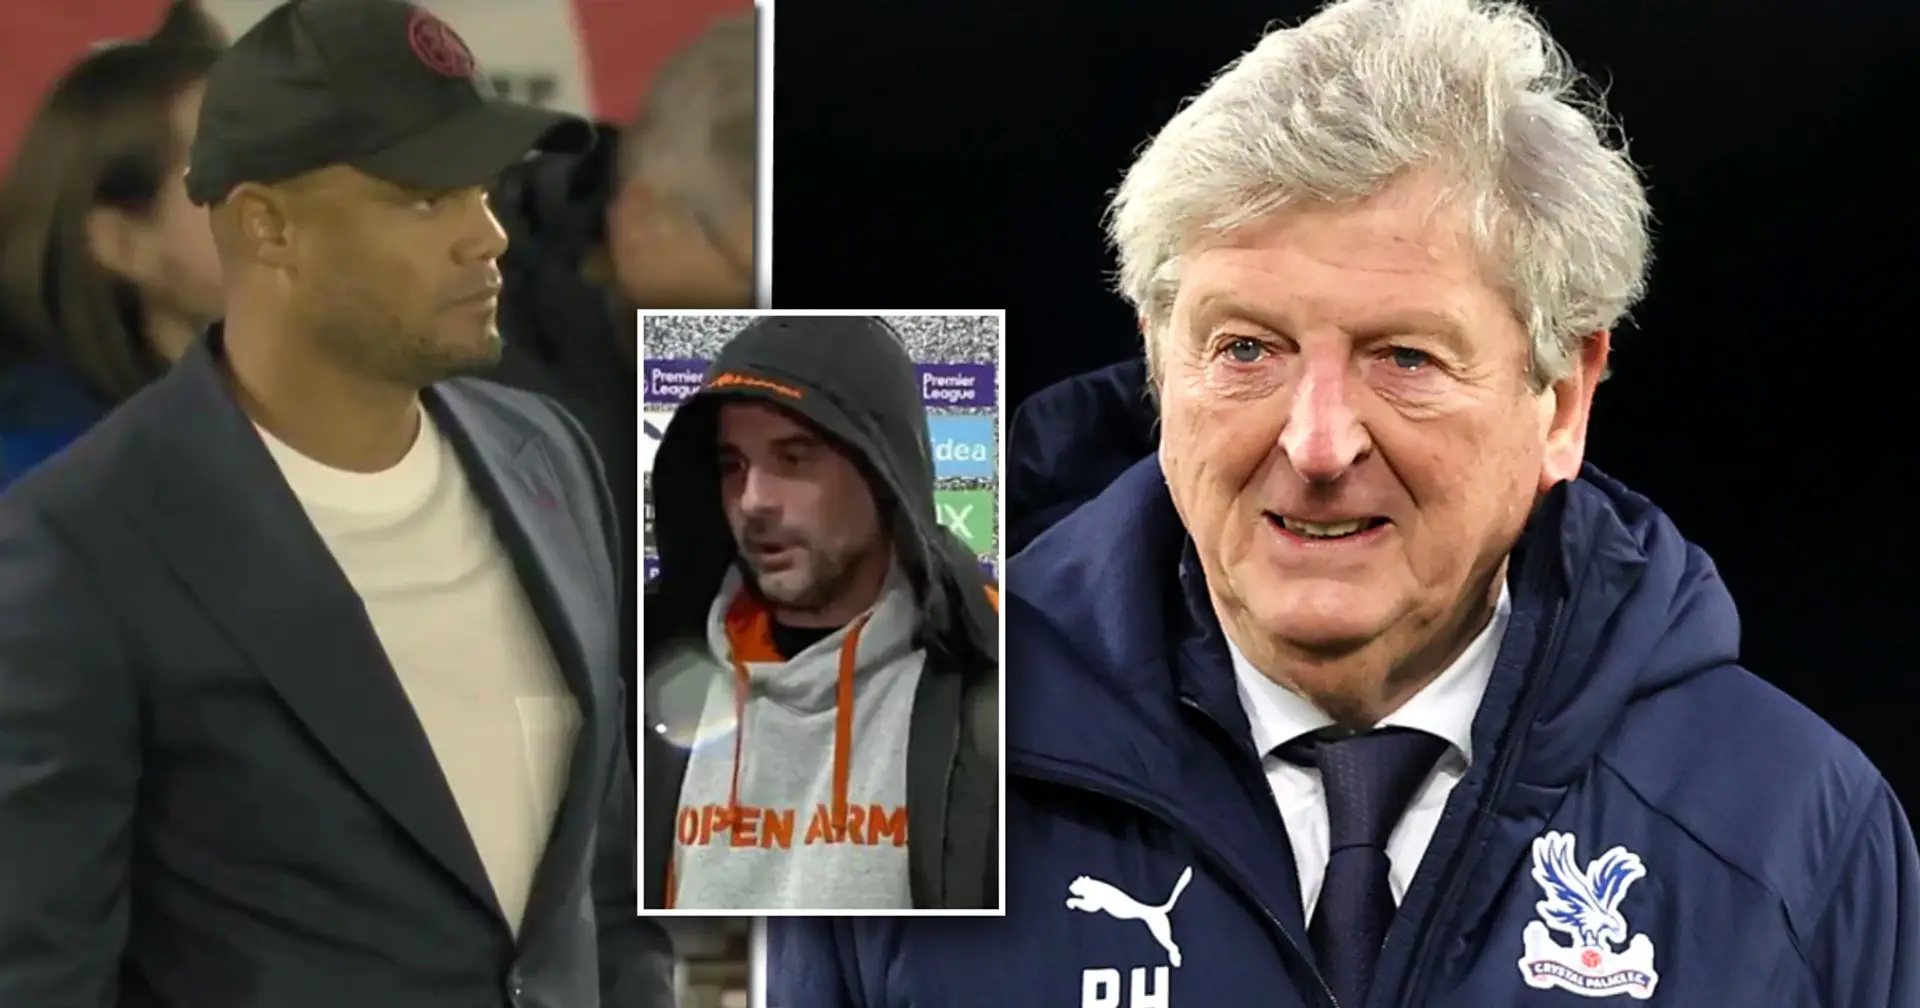 'Should be completely illegal to wear that': Fans name worst dressed Premier League head coach